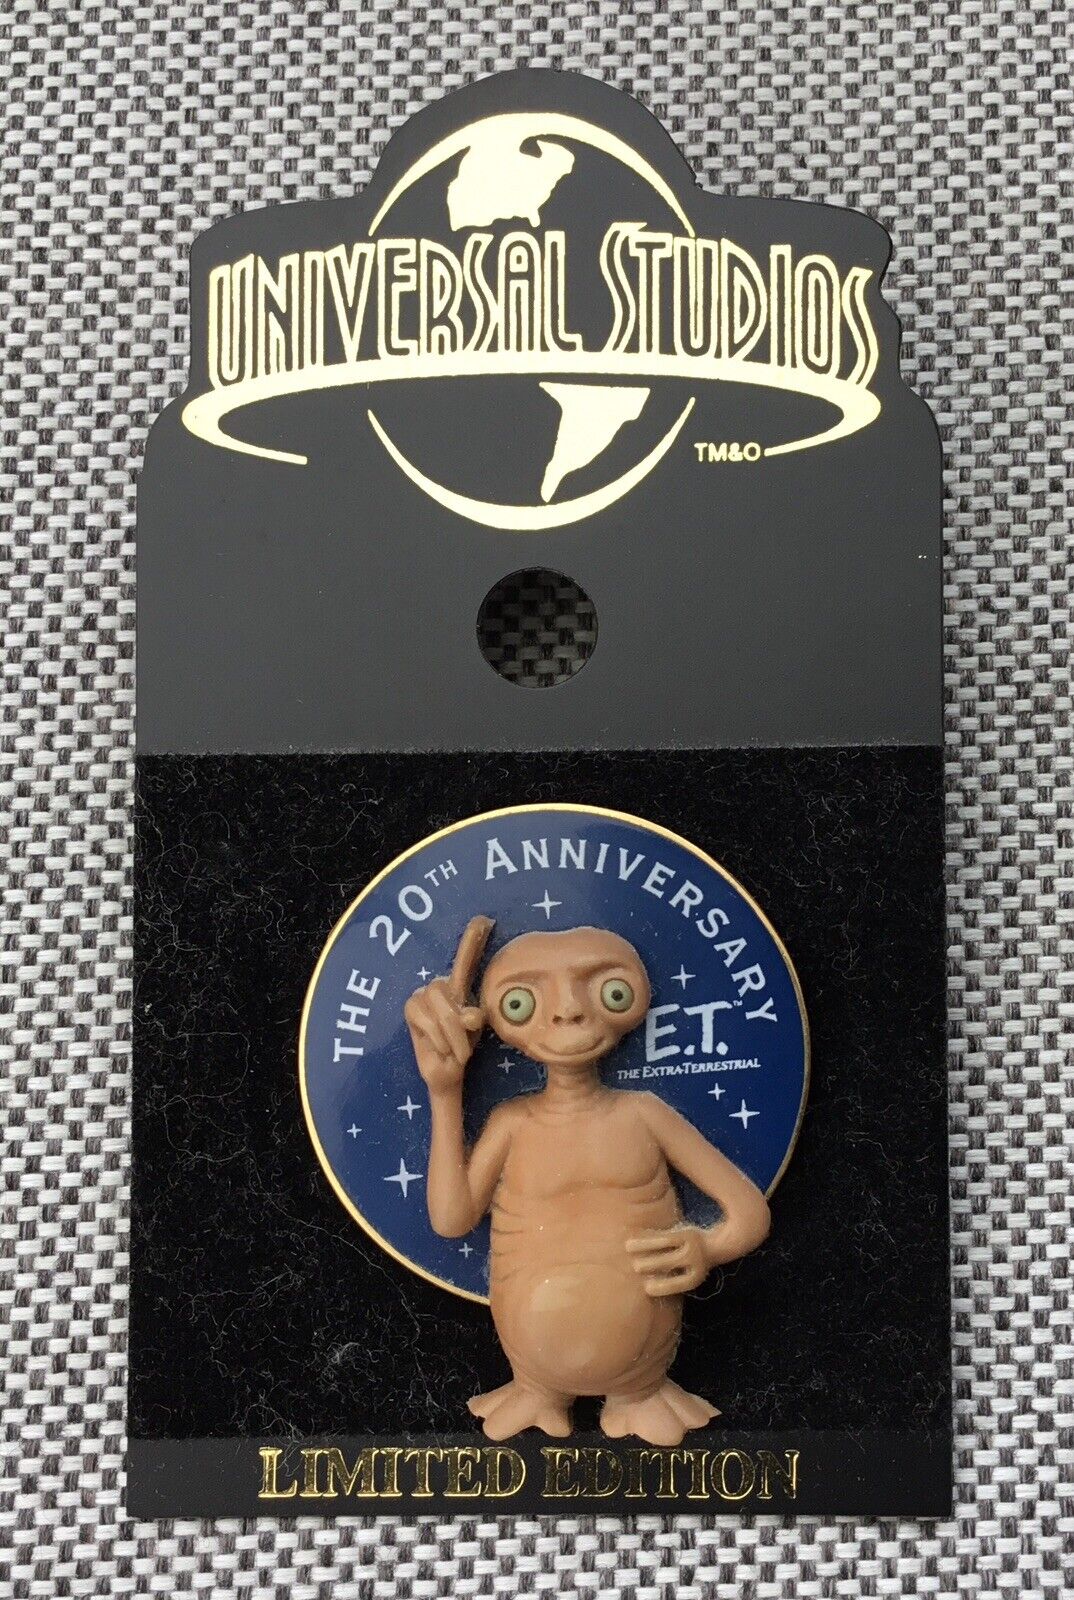 Universal Studios ET 20th Anniversary Limited Edition Pin Badge